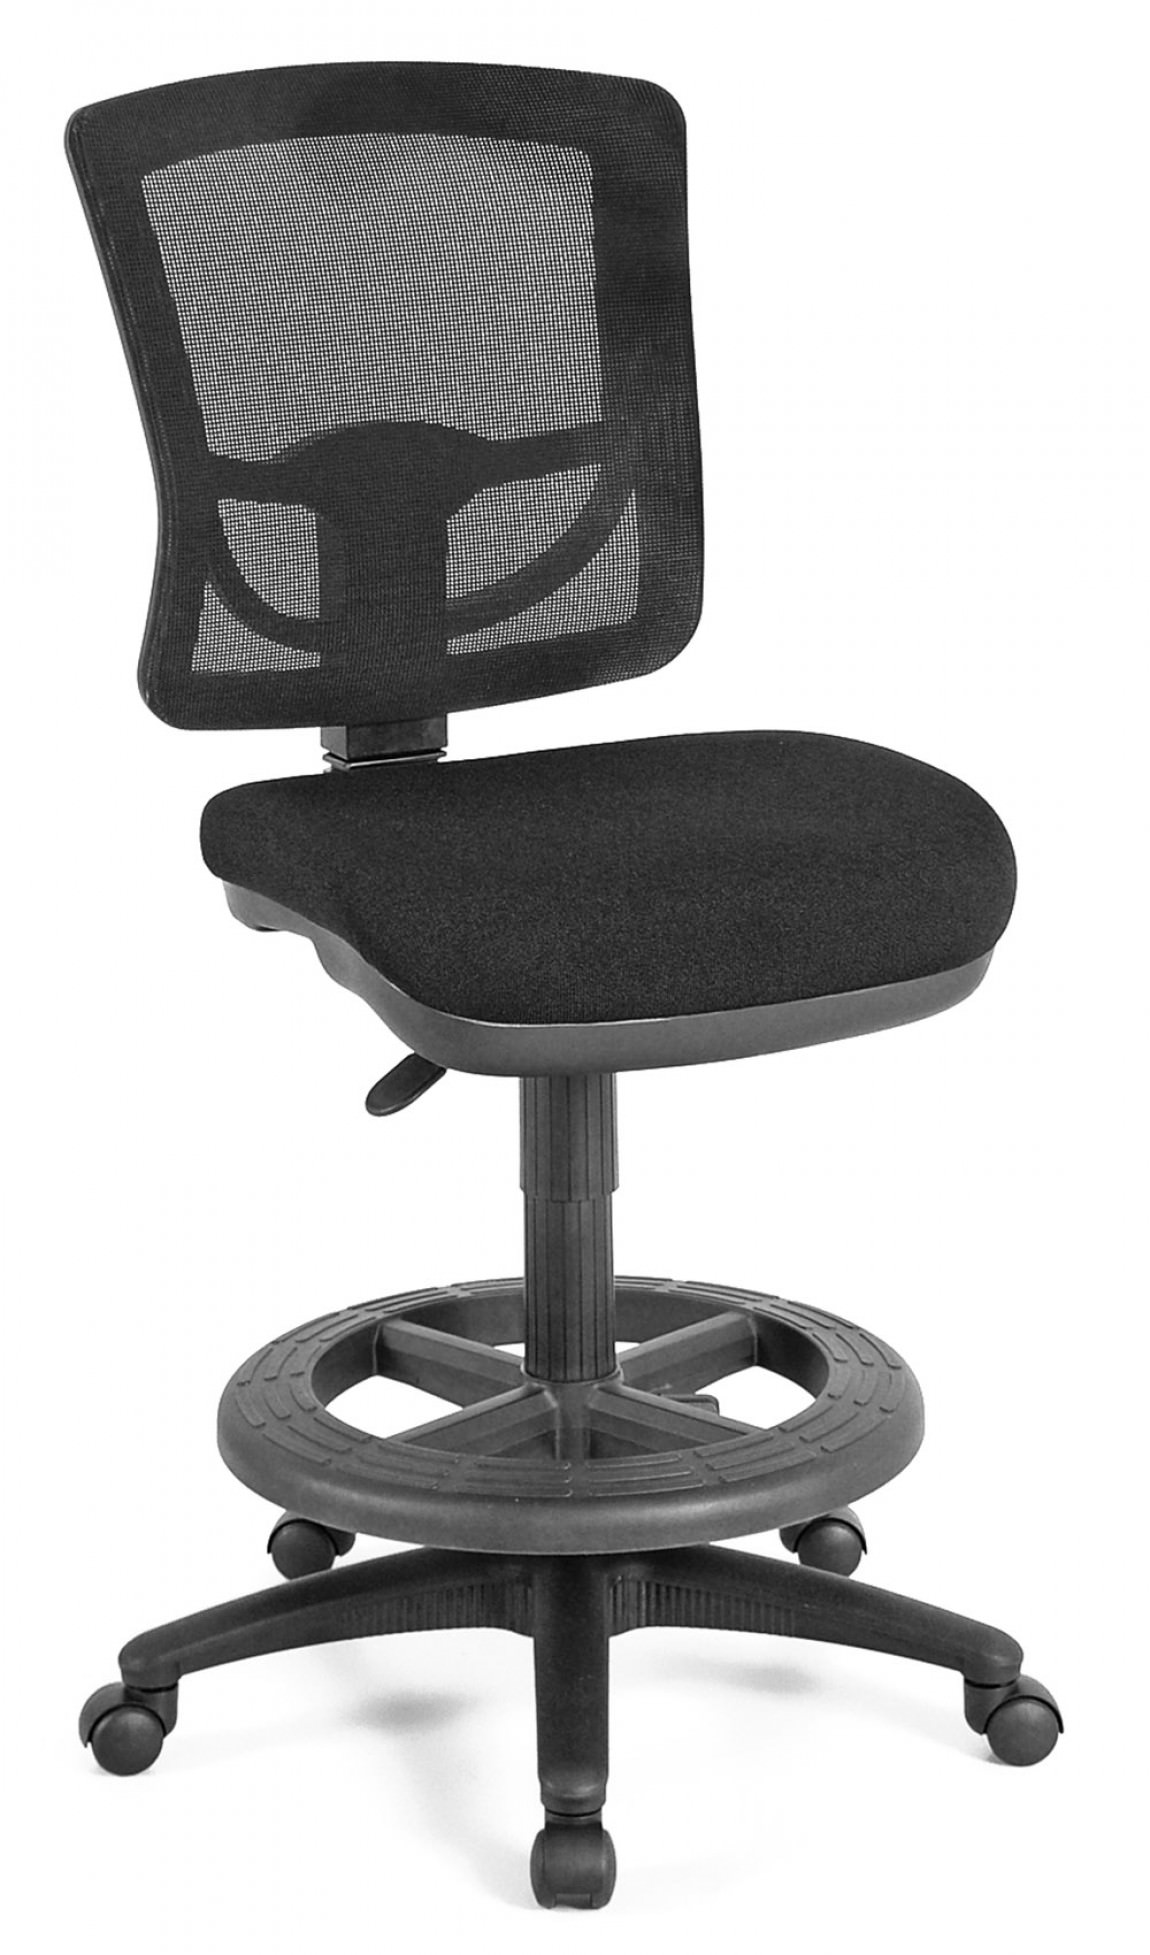 Mesh Back Stool Chair without arms